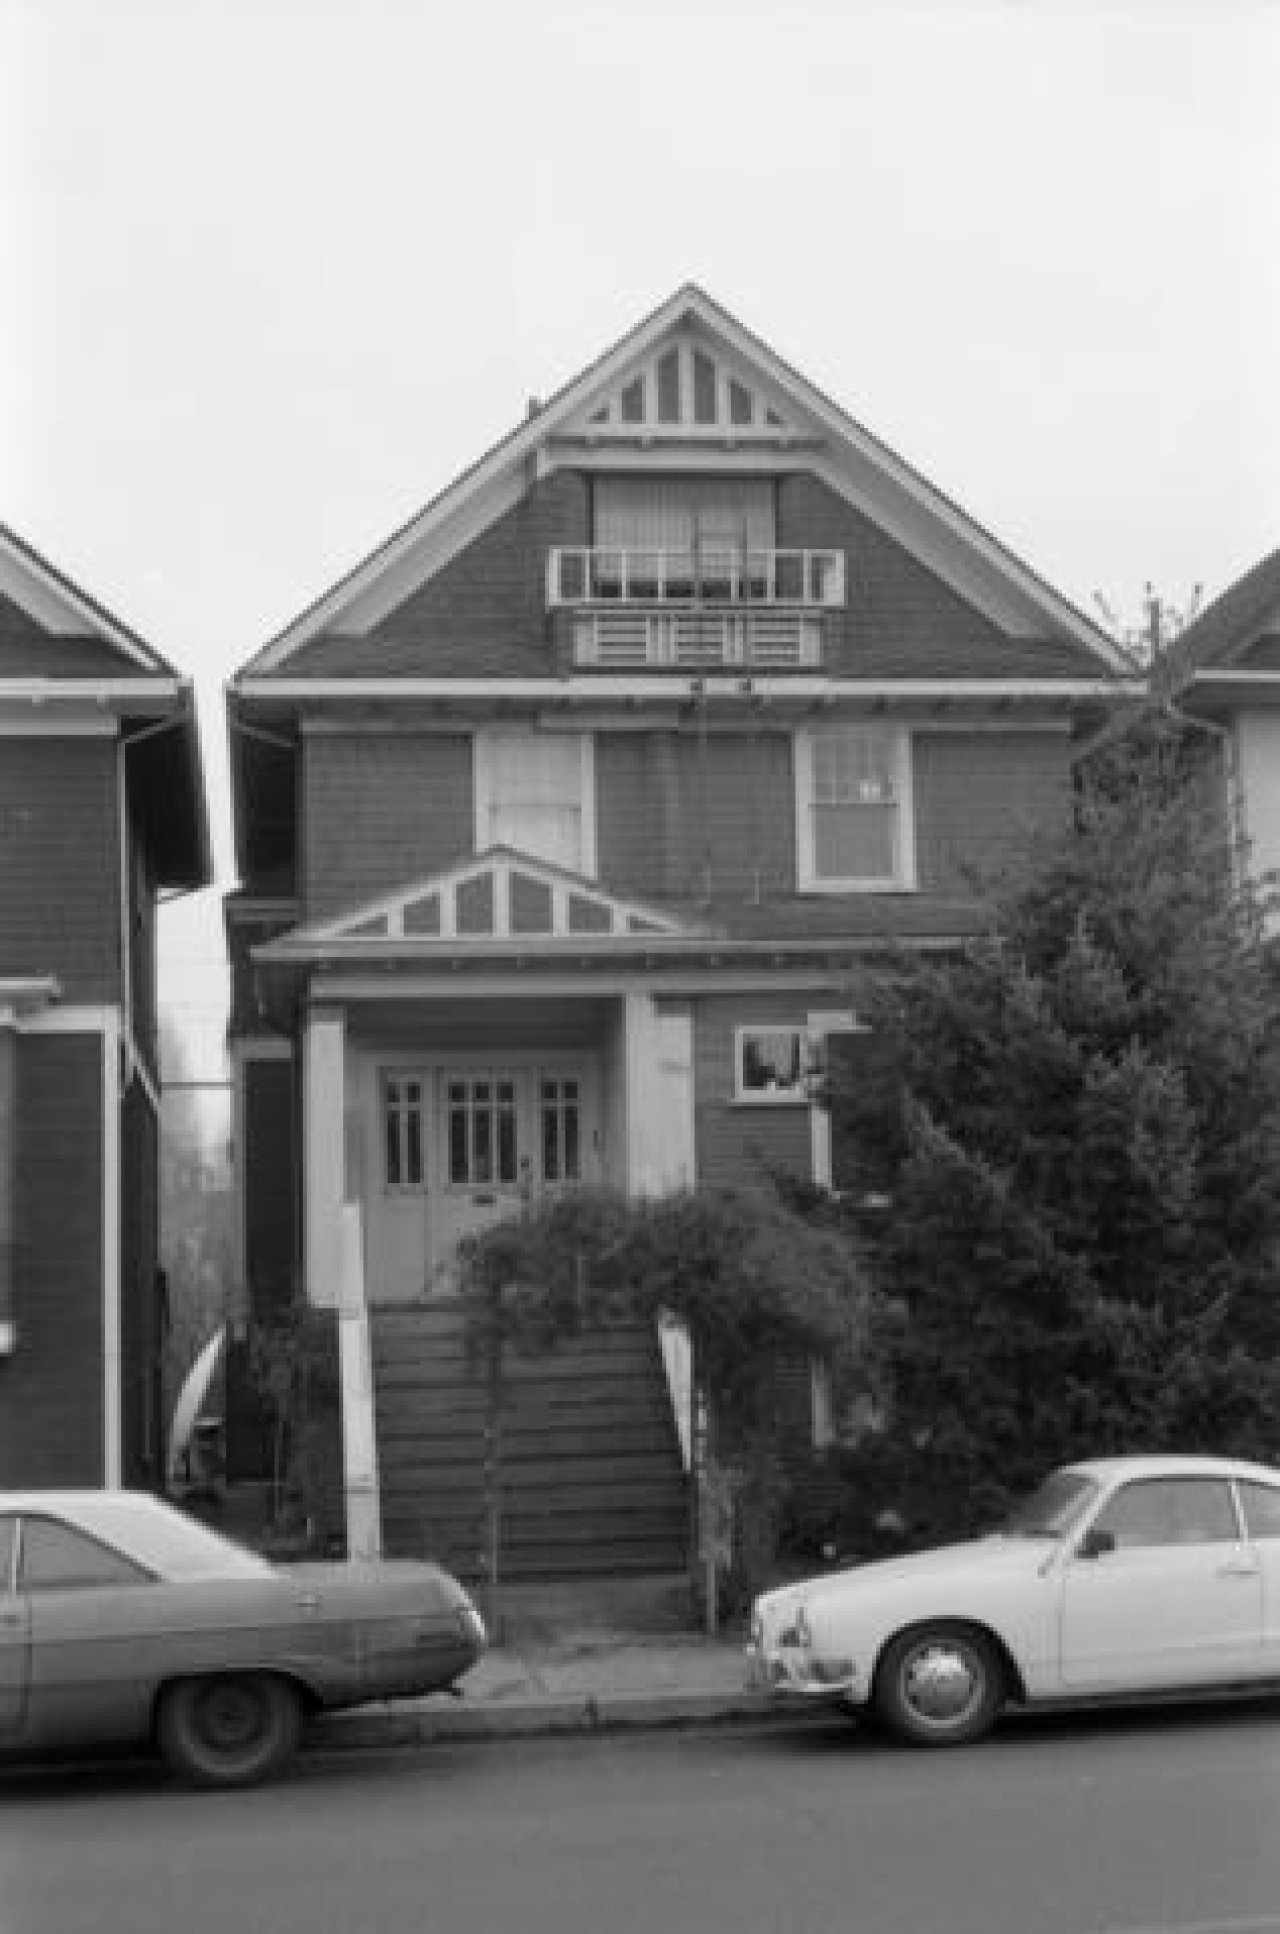 2232 MacDonald St 1985. Source: City of Vancouver Archives 791 0752